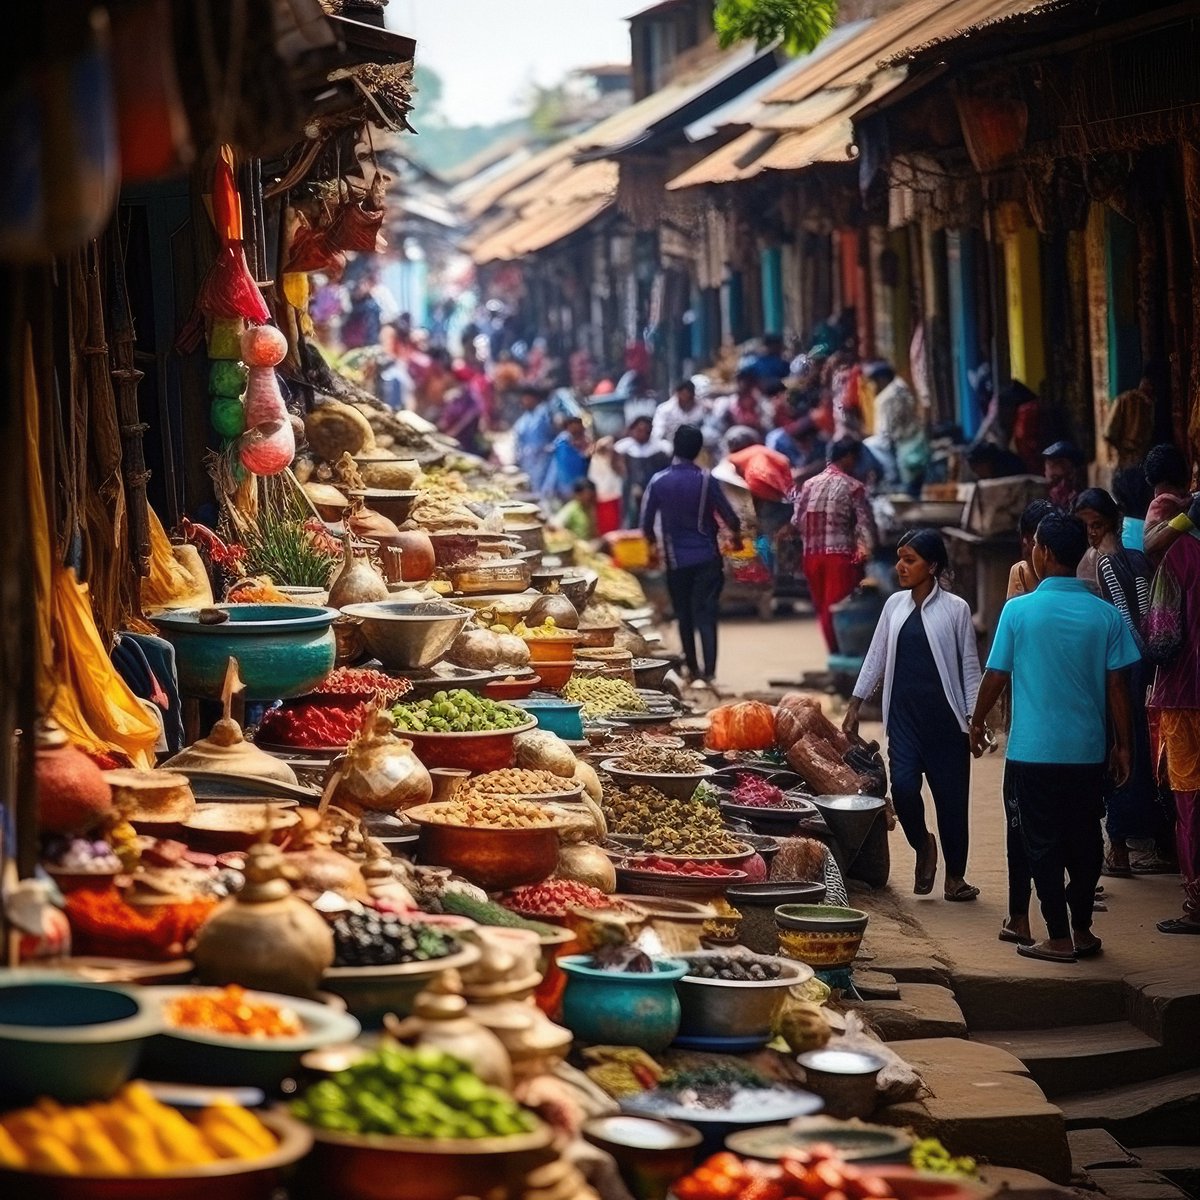 A symphony of colors and cultures. The marketplace buzzes with life and stories waiting to be told. 🛍️' #CulturalFusion #MarketBuzz